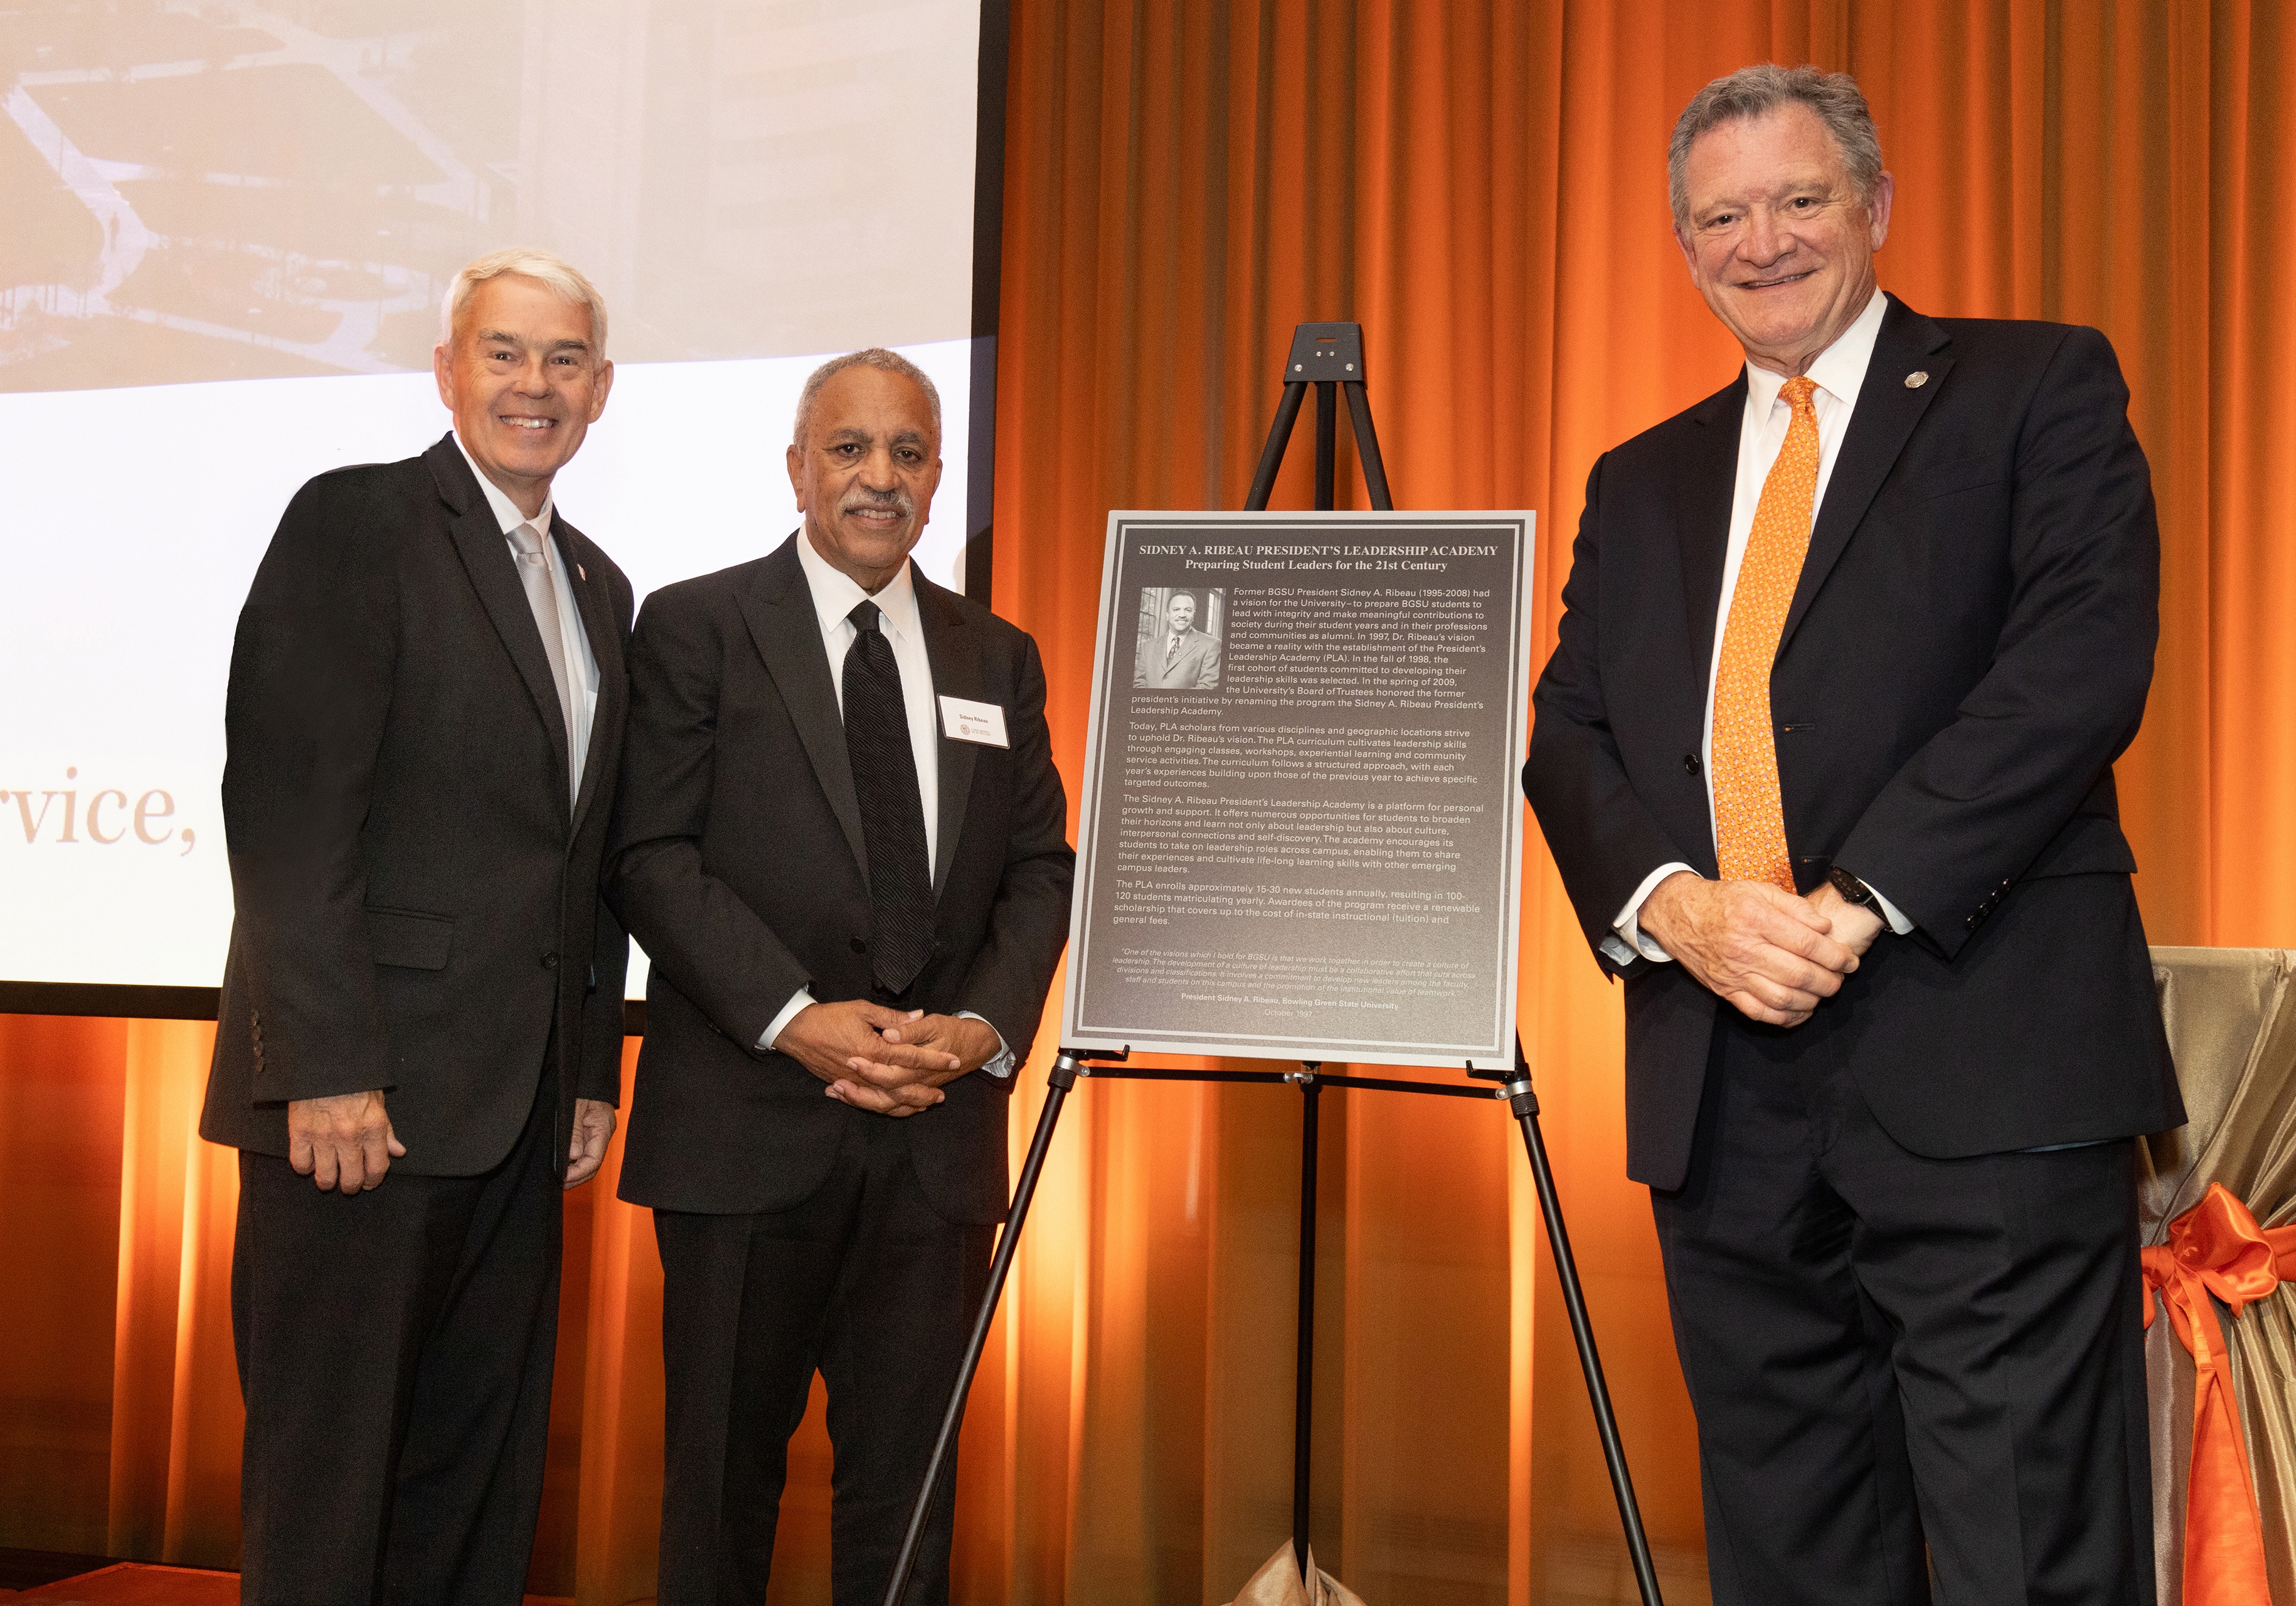 Ohio Department of Higher Education Chancellor Randy L. Gardner and President Rodney K. Rogers join Dr. Ribeau on stage during the anniversary dinner.(BGSU photo)